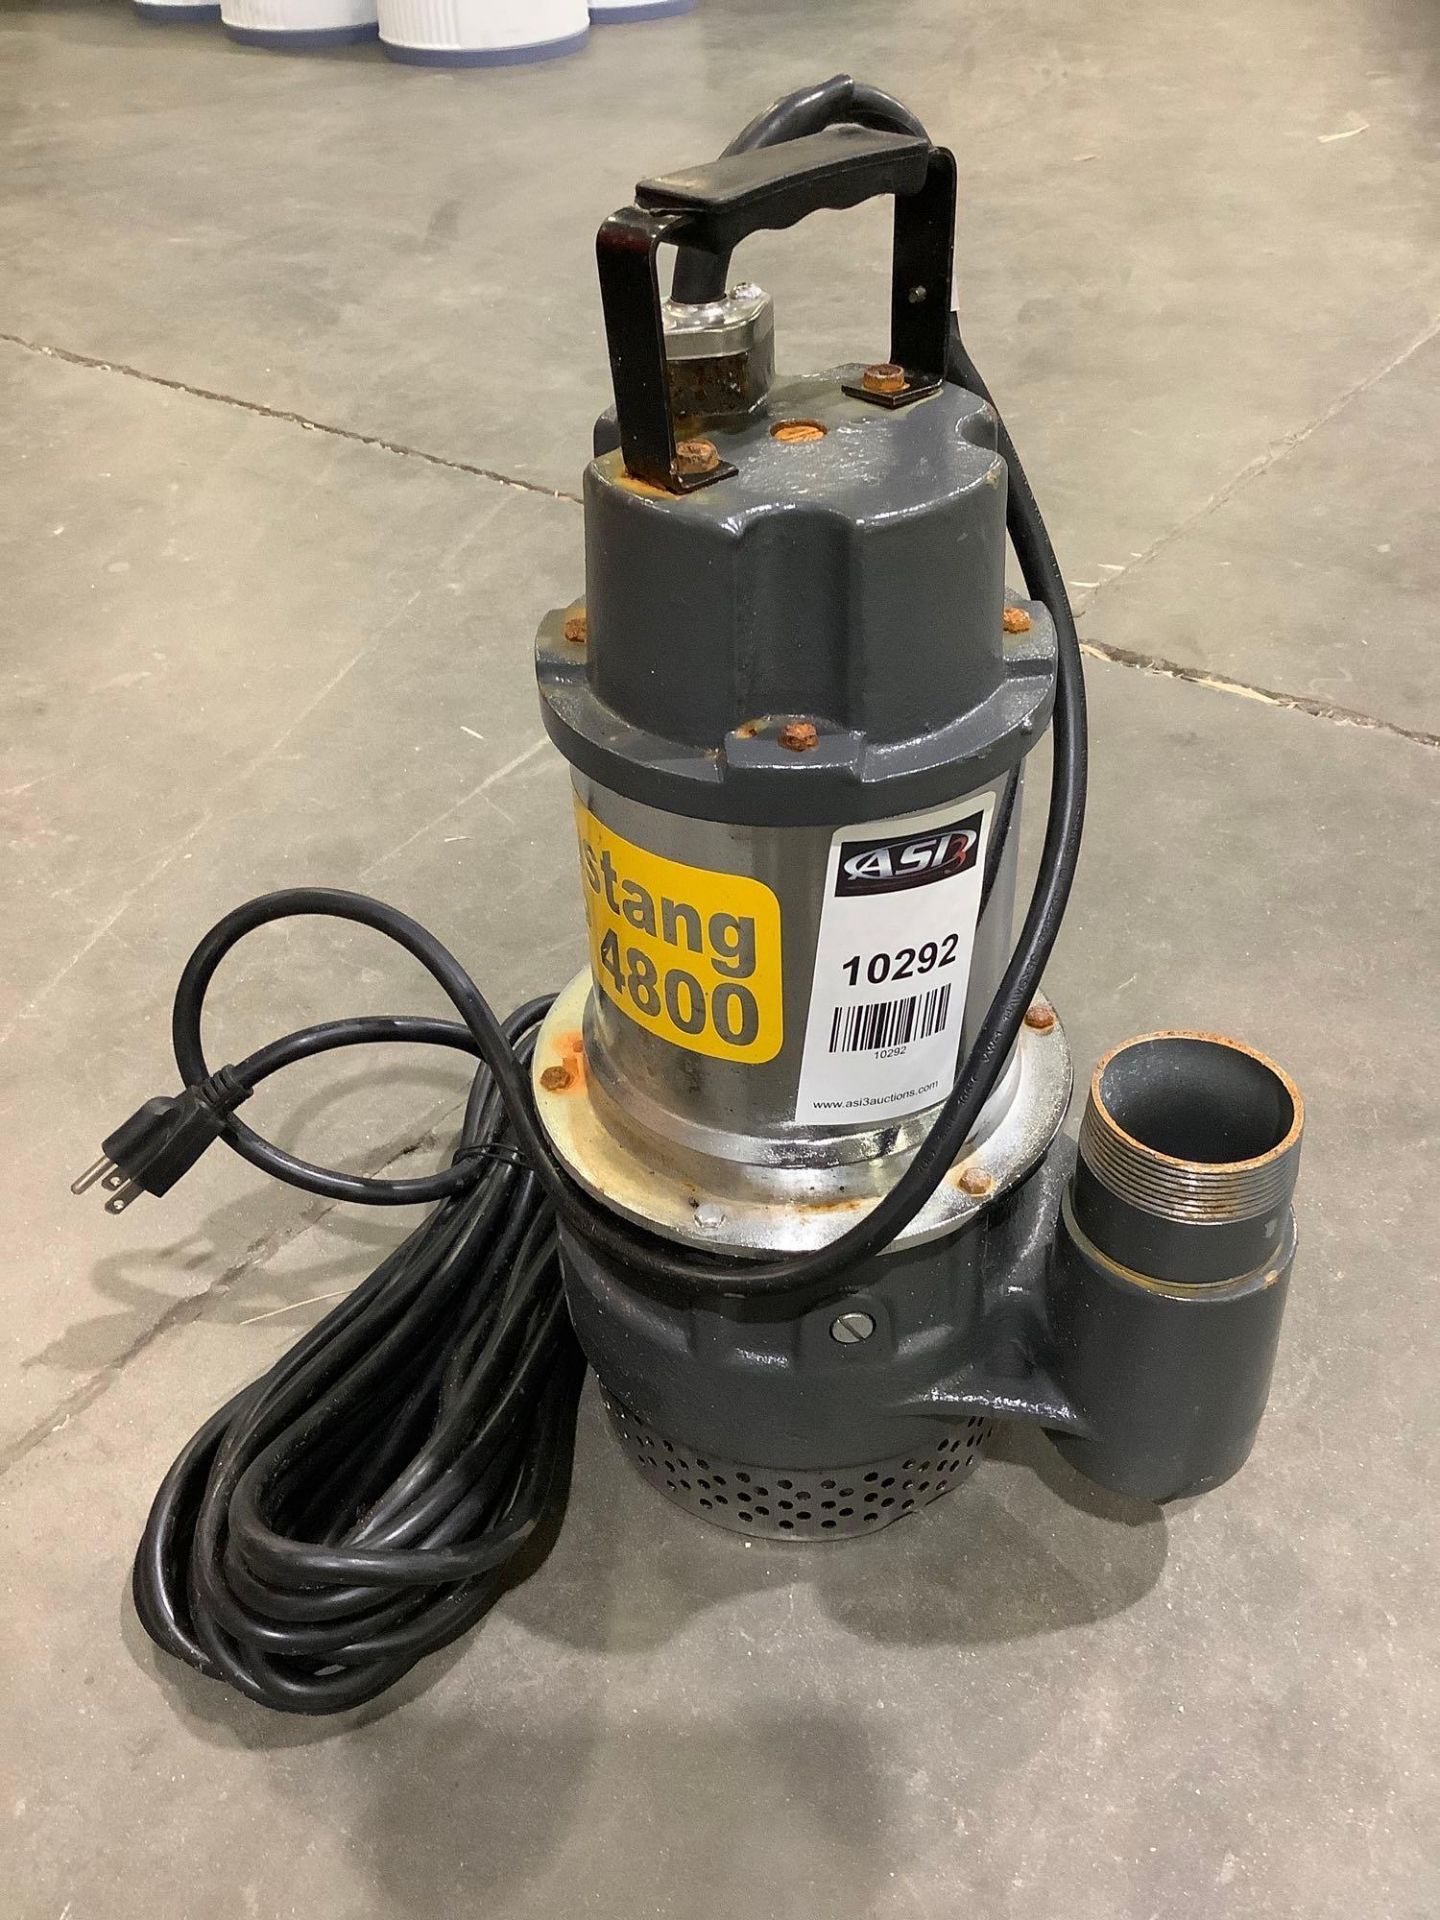 UNUSED SUBMERSIBLE MUSTANG MP4800 PUMP - Image 2 of 6